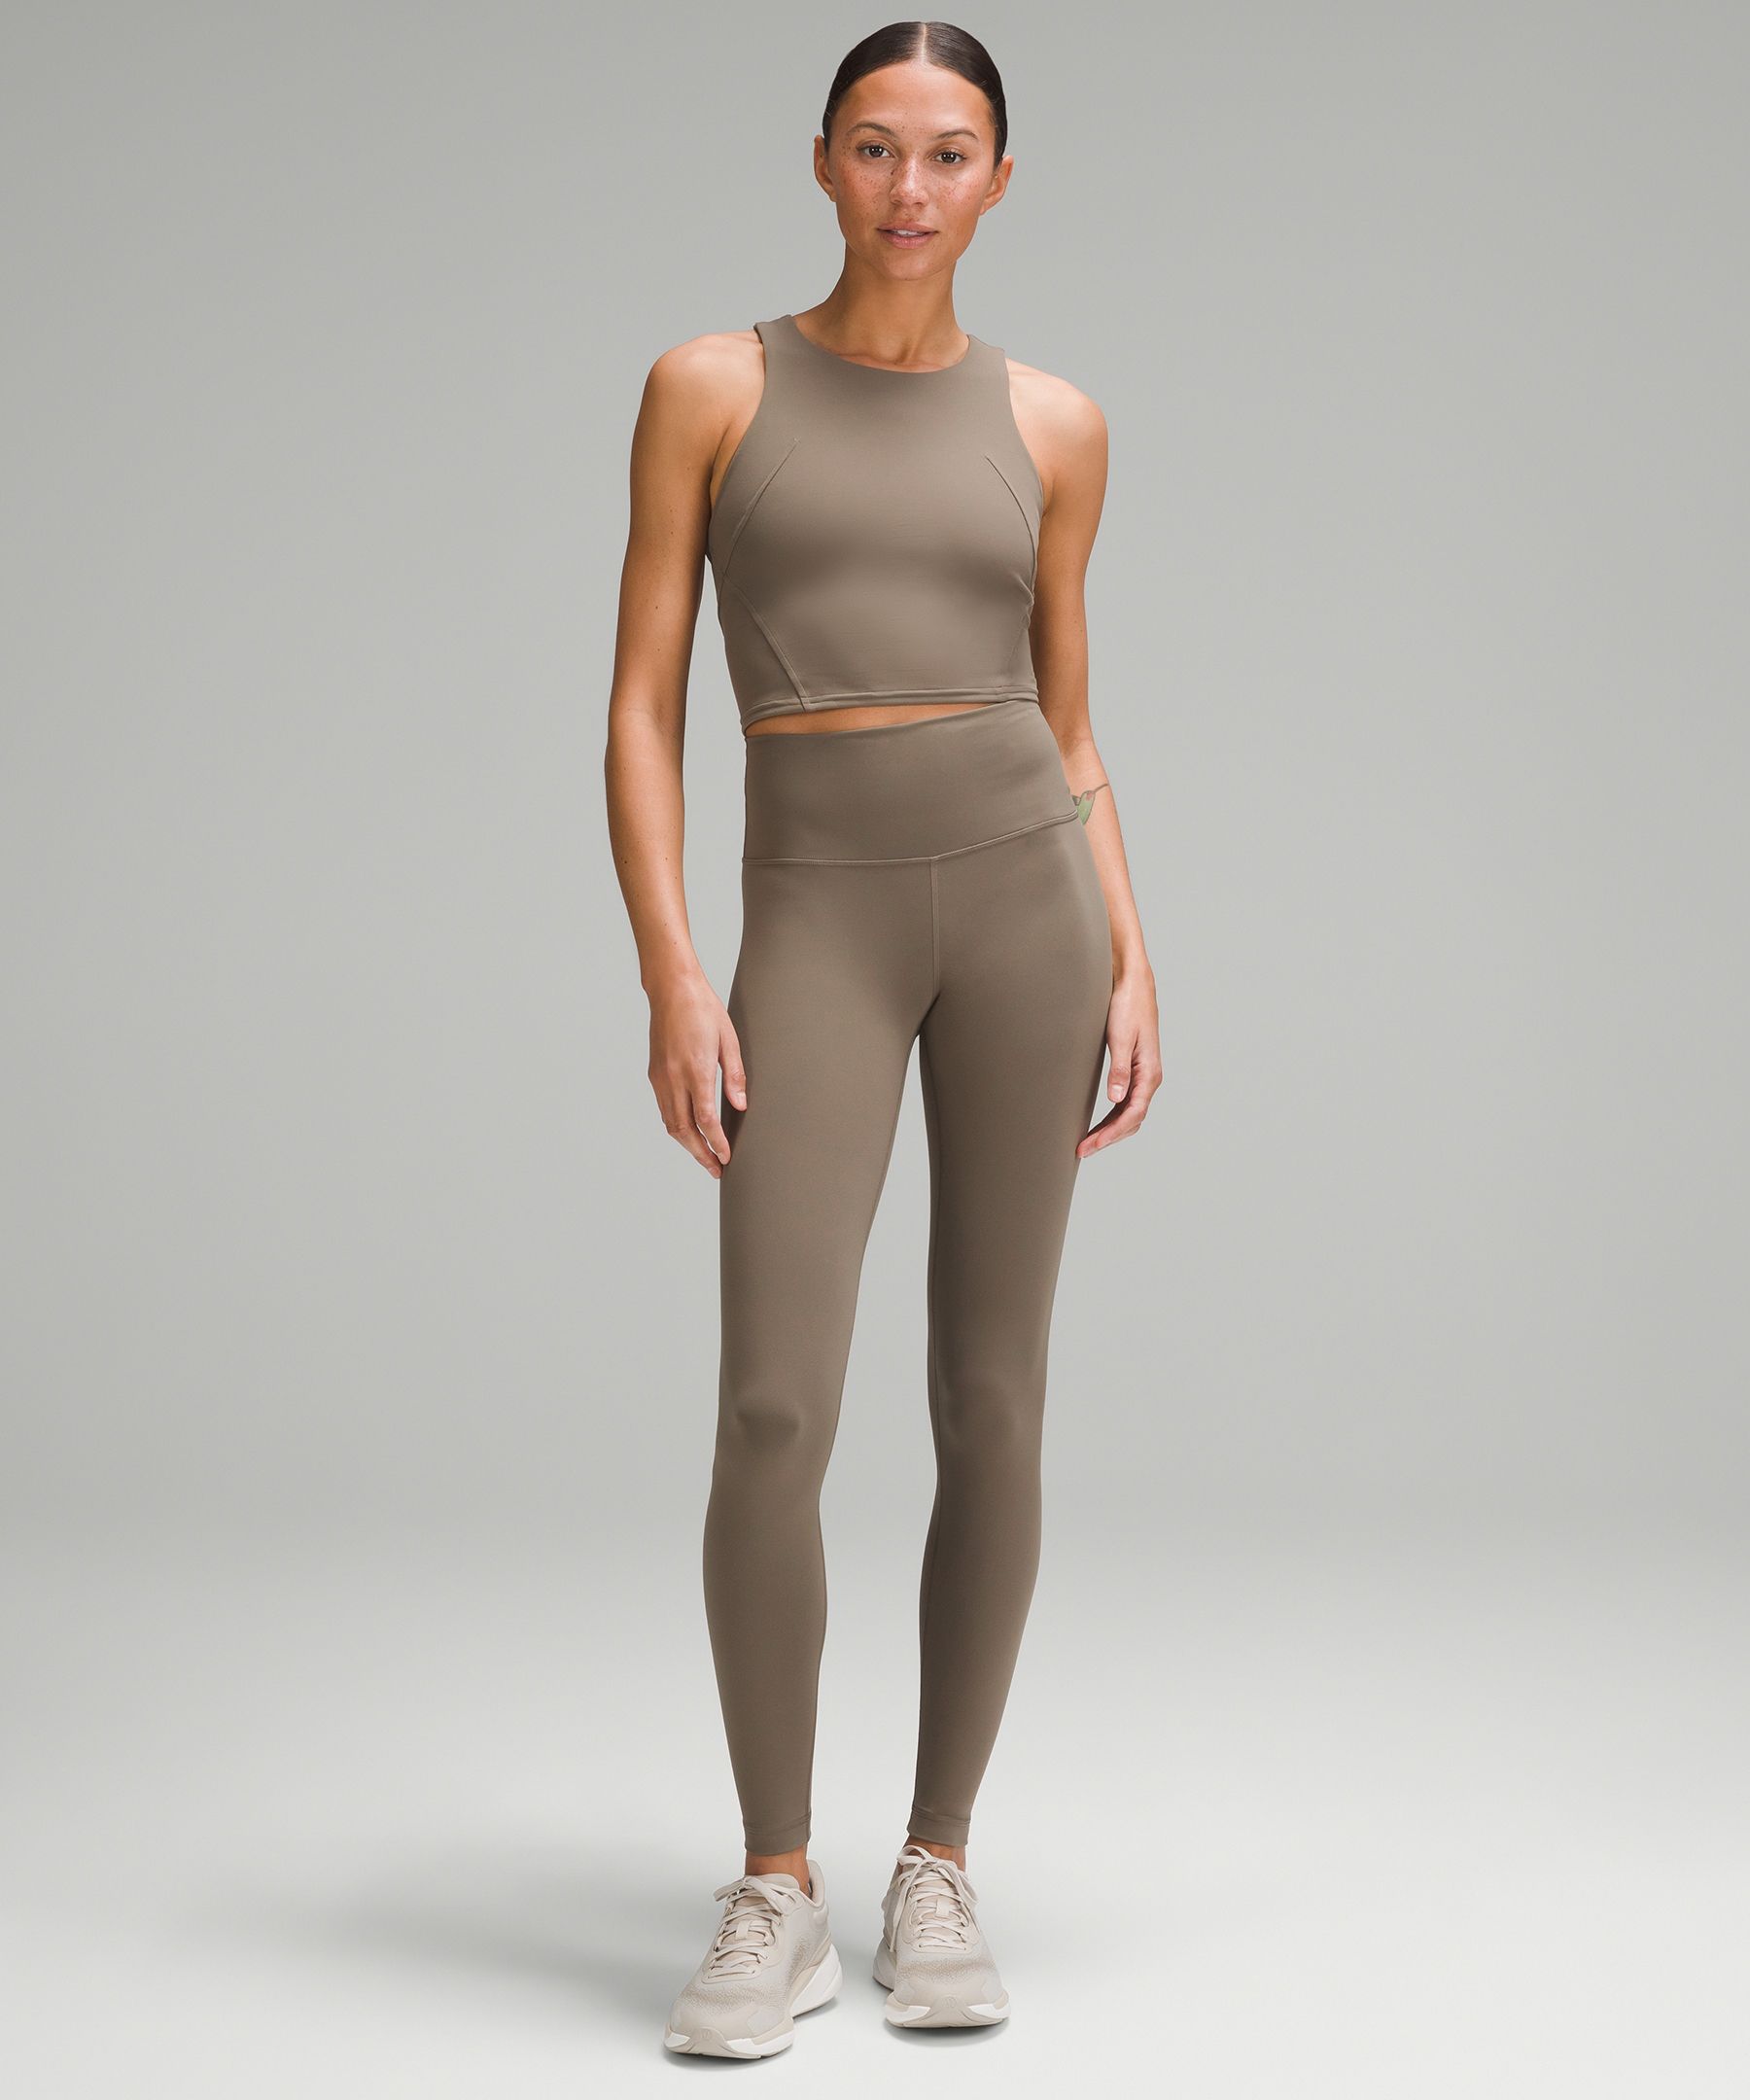 where to buy lululemon on sale? — Topknots and Pearls